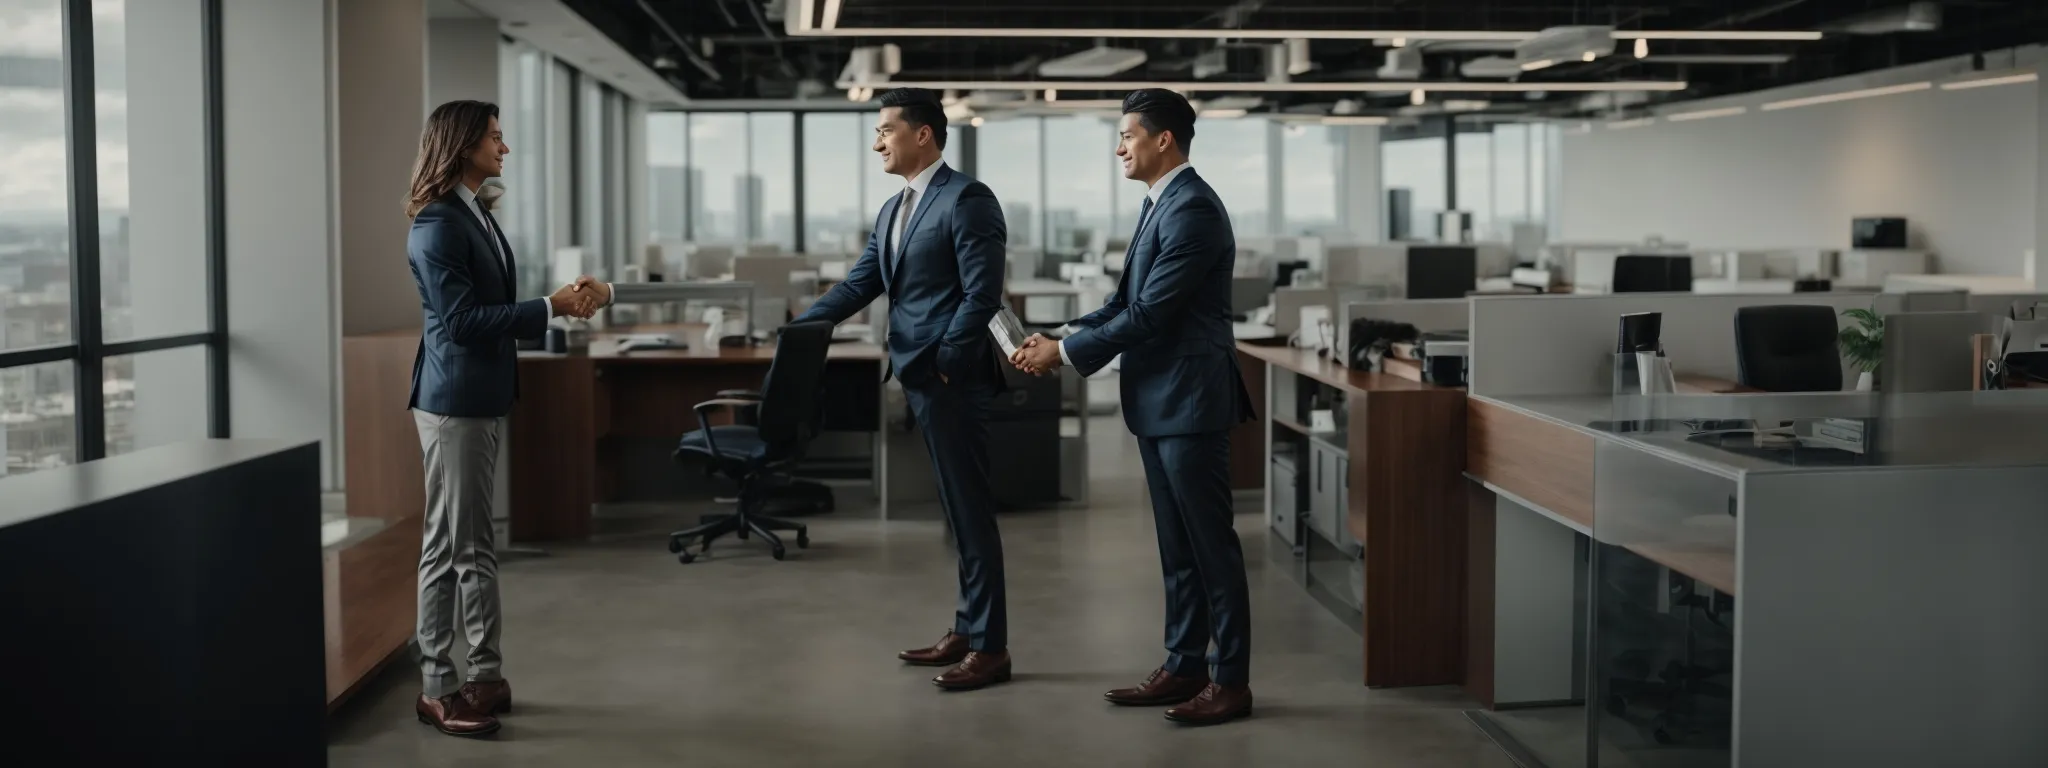 two corporate professionals shaking hands in a modern office environment to seal a partnership deal.